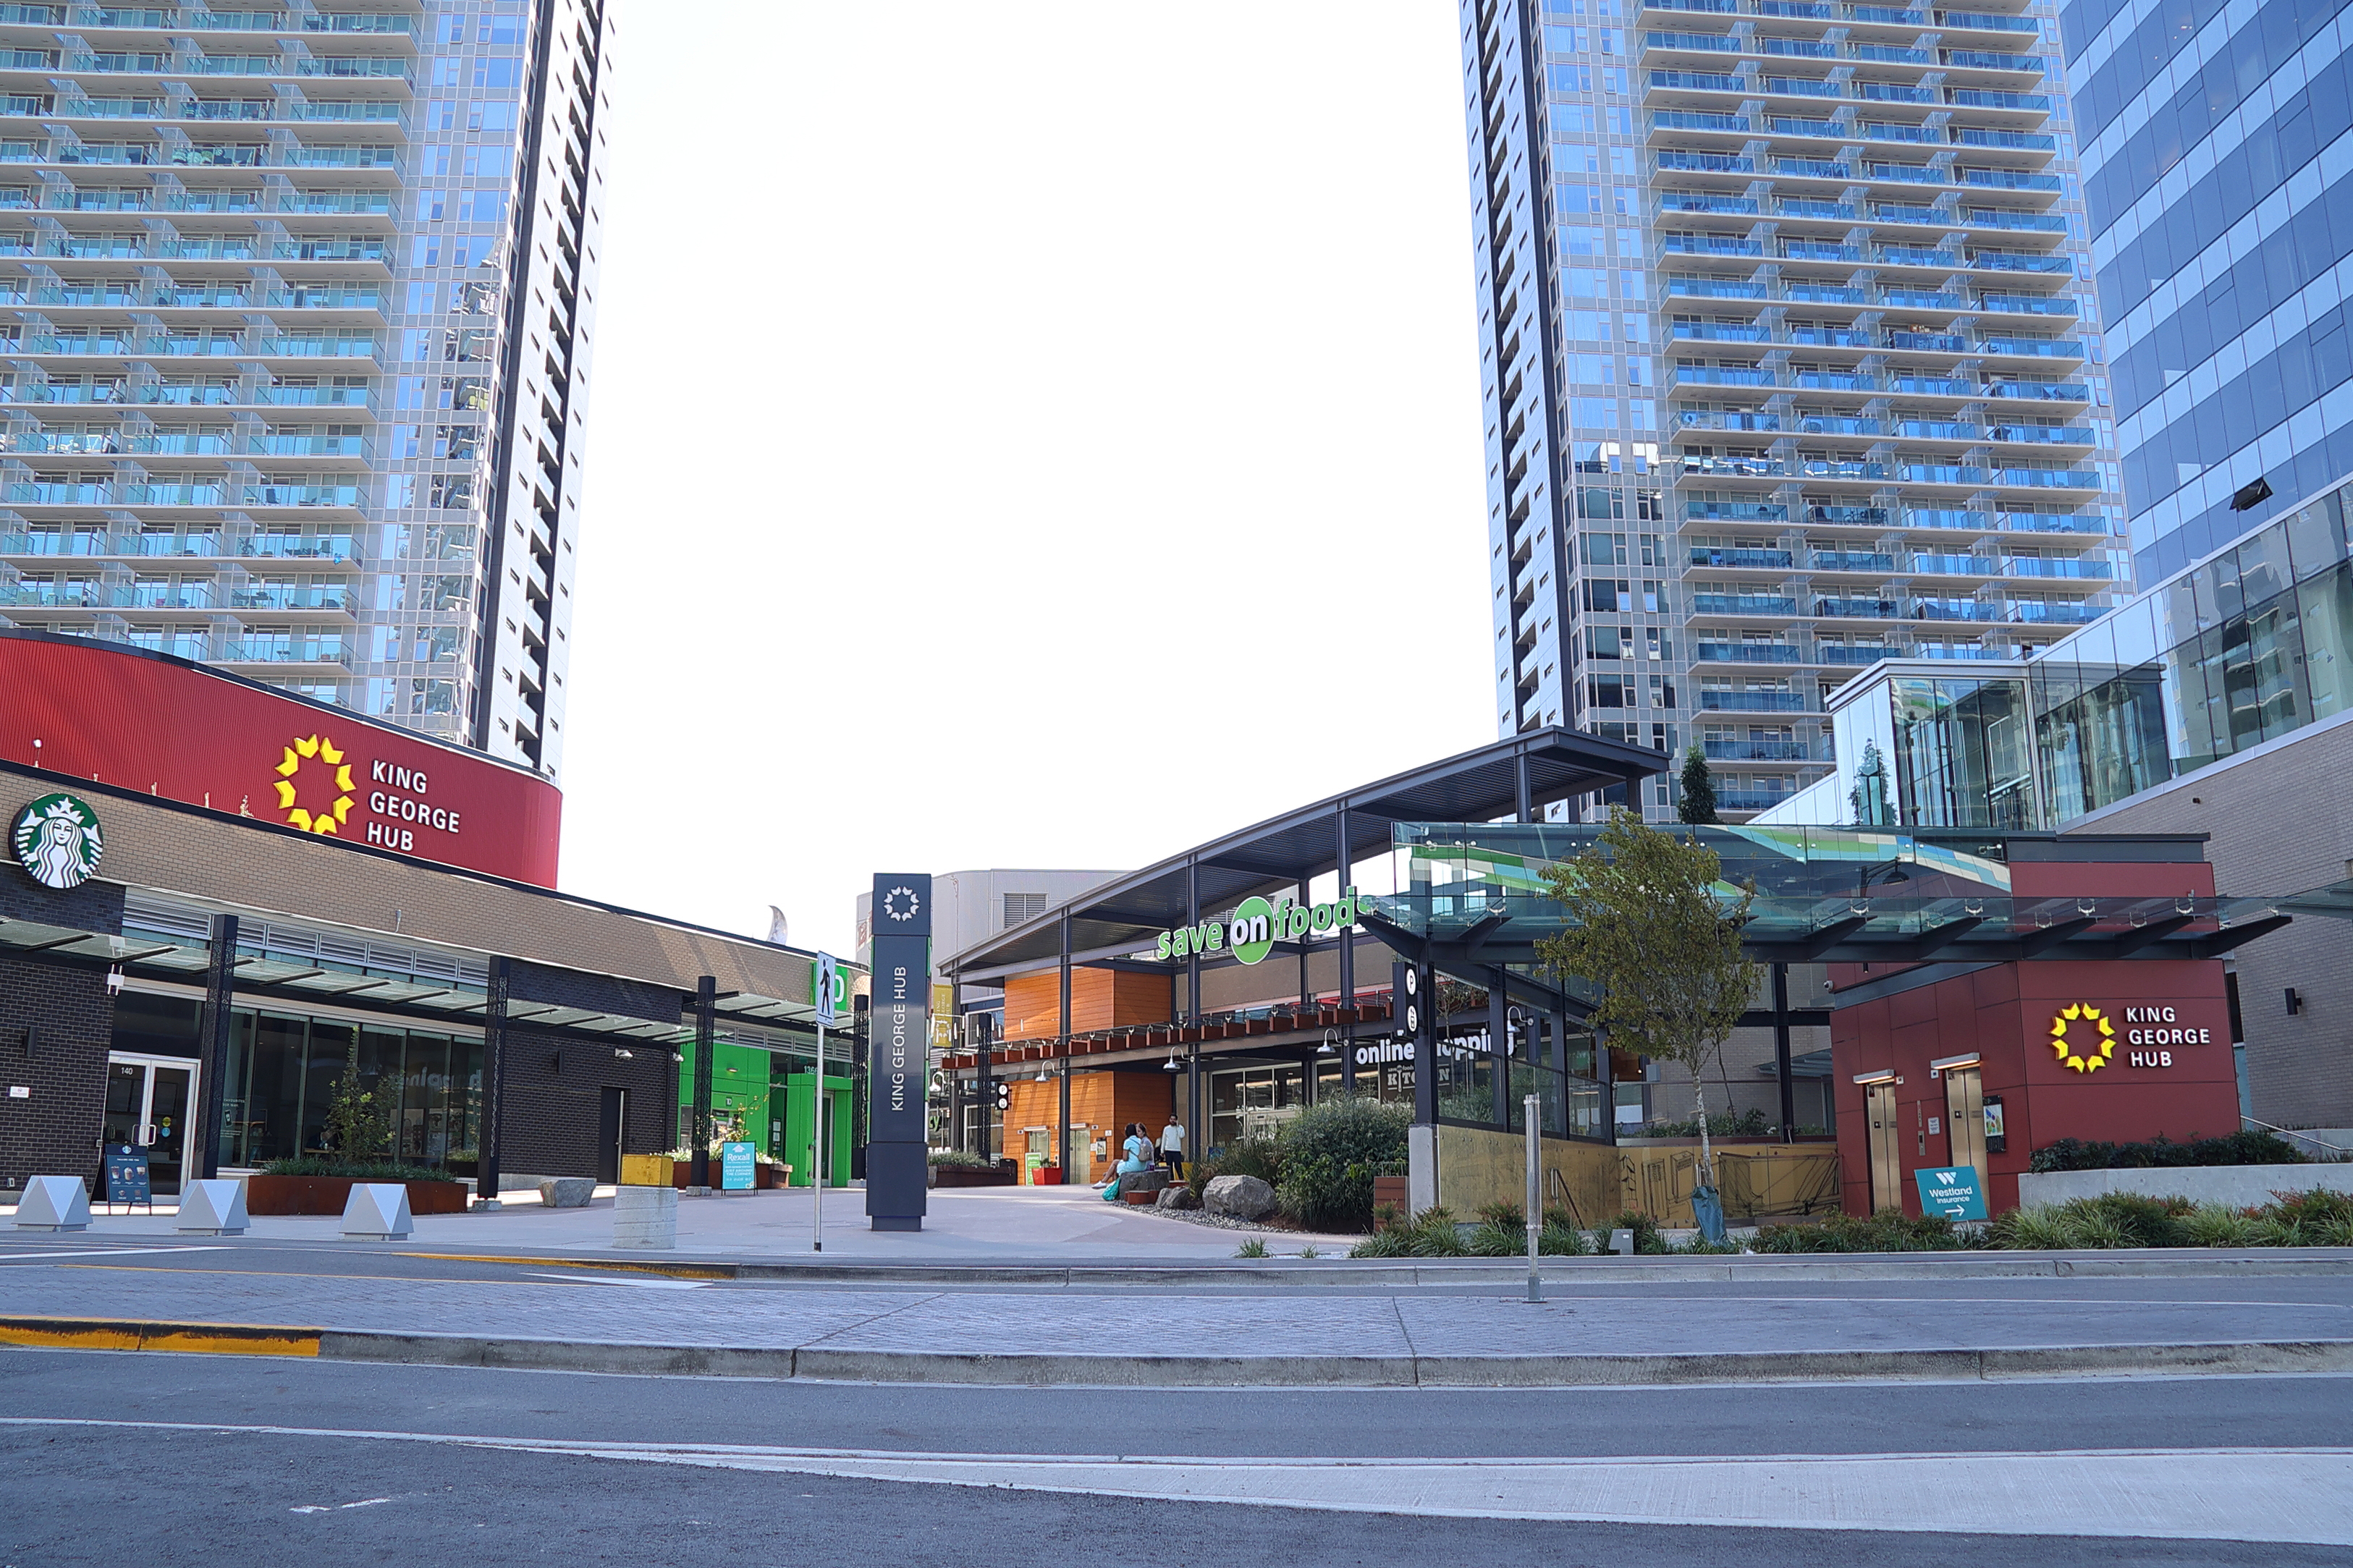 King George Hub is a mixed-use transit-oriented community that will be home to 4,000 residents and 2,700 job spaces.